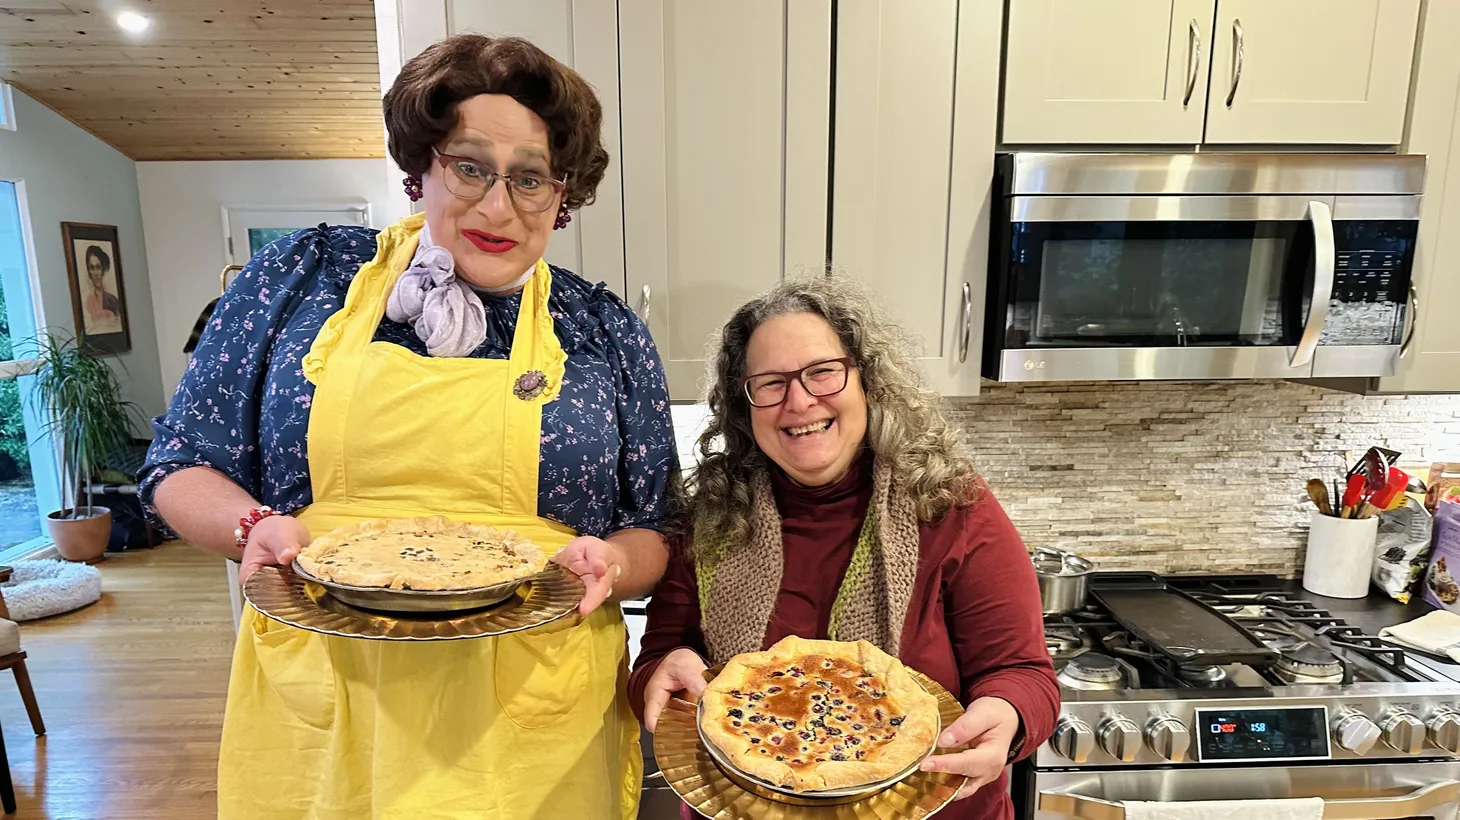 The pie-loving Bertha (left) and Good Food host Evan Kleiman show off a pair of pies after one of Bertha's baking classes.